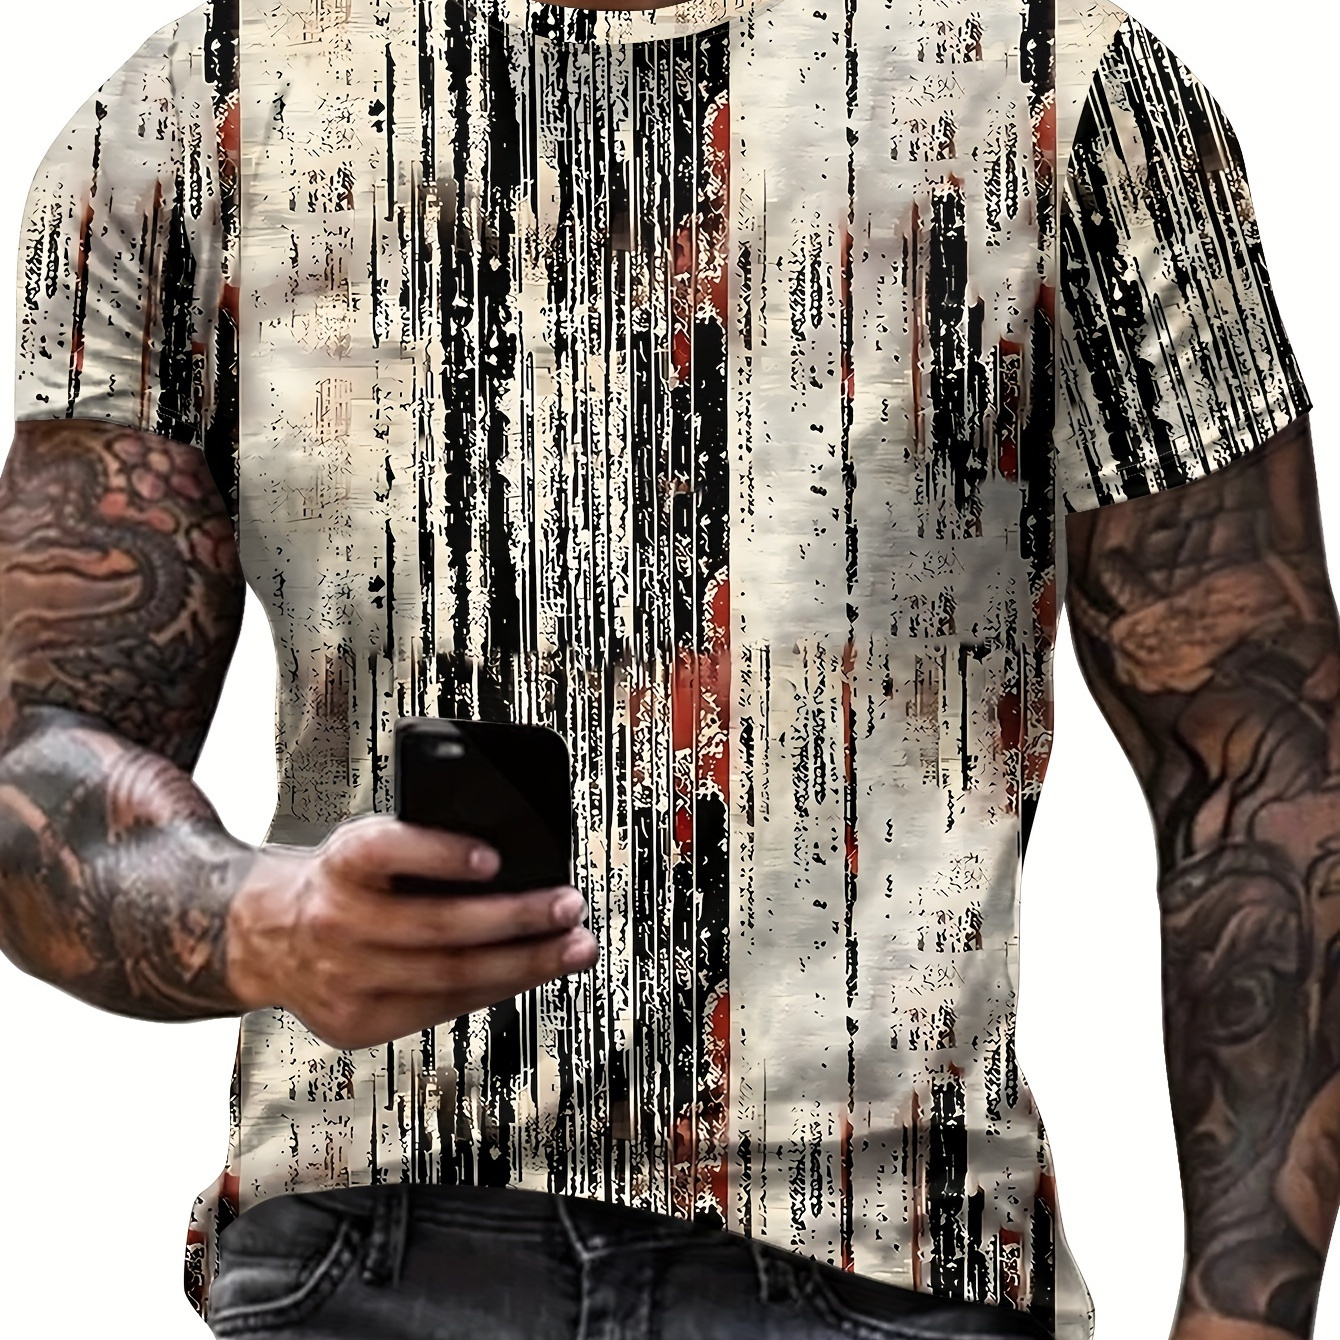 

Men's Casual And Chic Stripe Pattern Print T-shirt With Crew Neck And Short Sleeve, Cool Tops For Summer Leisurewear And Outdoors Activities